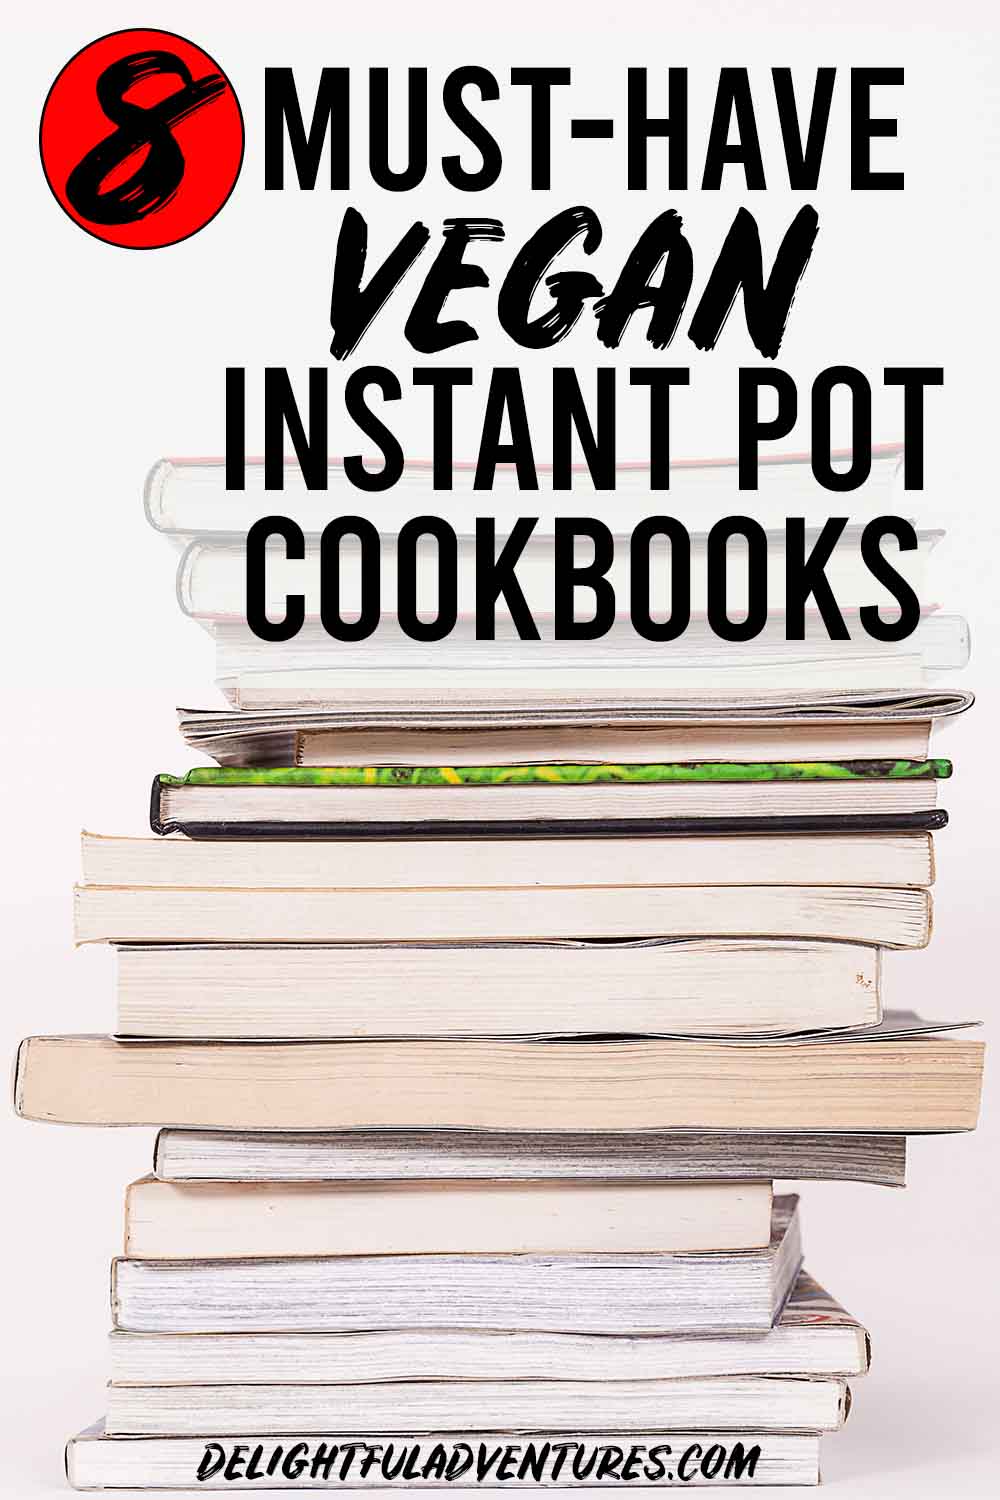 A stack on books on a table, a text overlay over the books says 8 must-have vegan Instant Pot cookbooks.